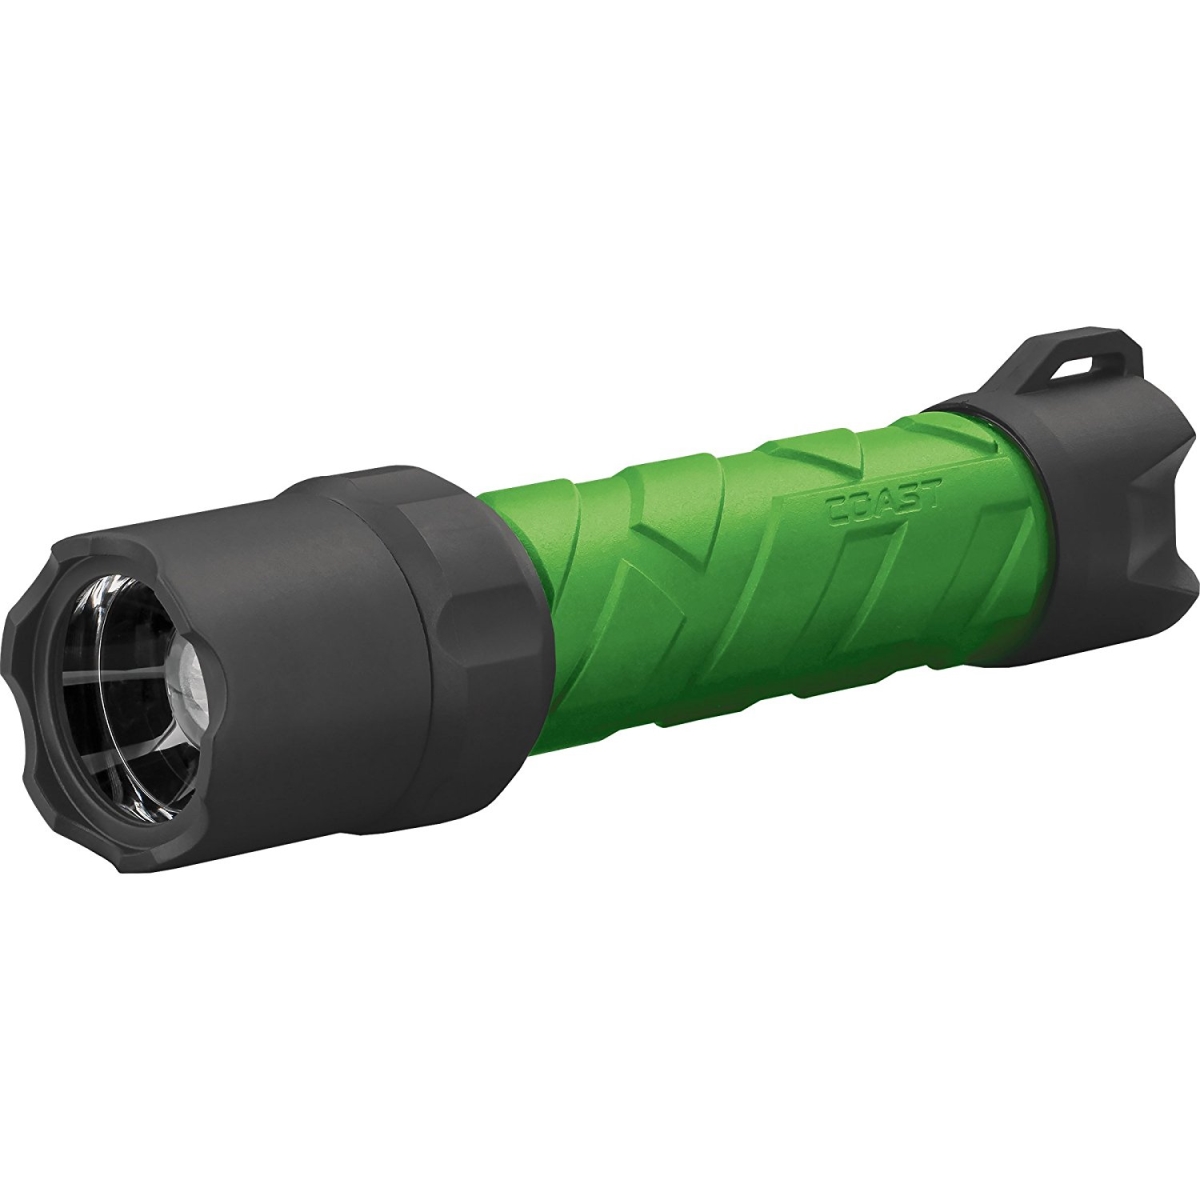 Cst-20520 Polyester 600r 530 Lm Rechargeable Waterproof Led Flashlight, Green